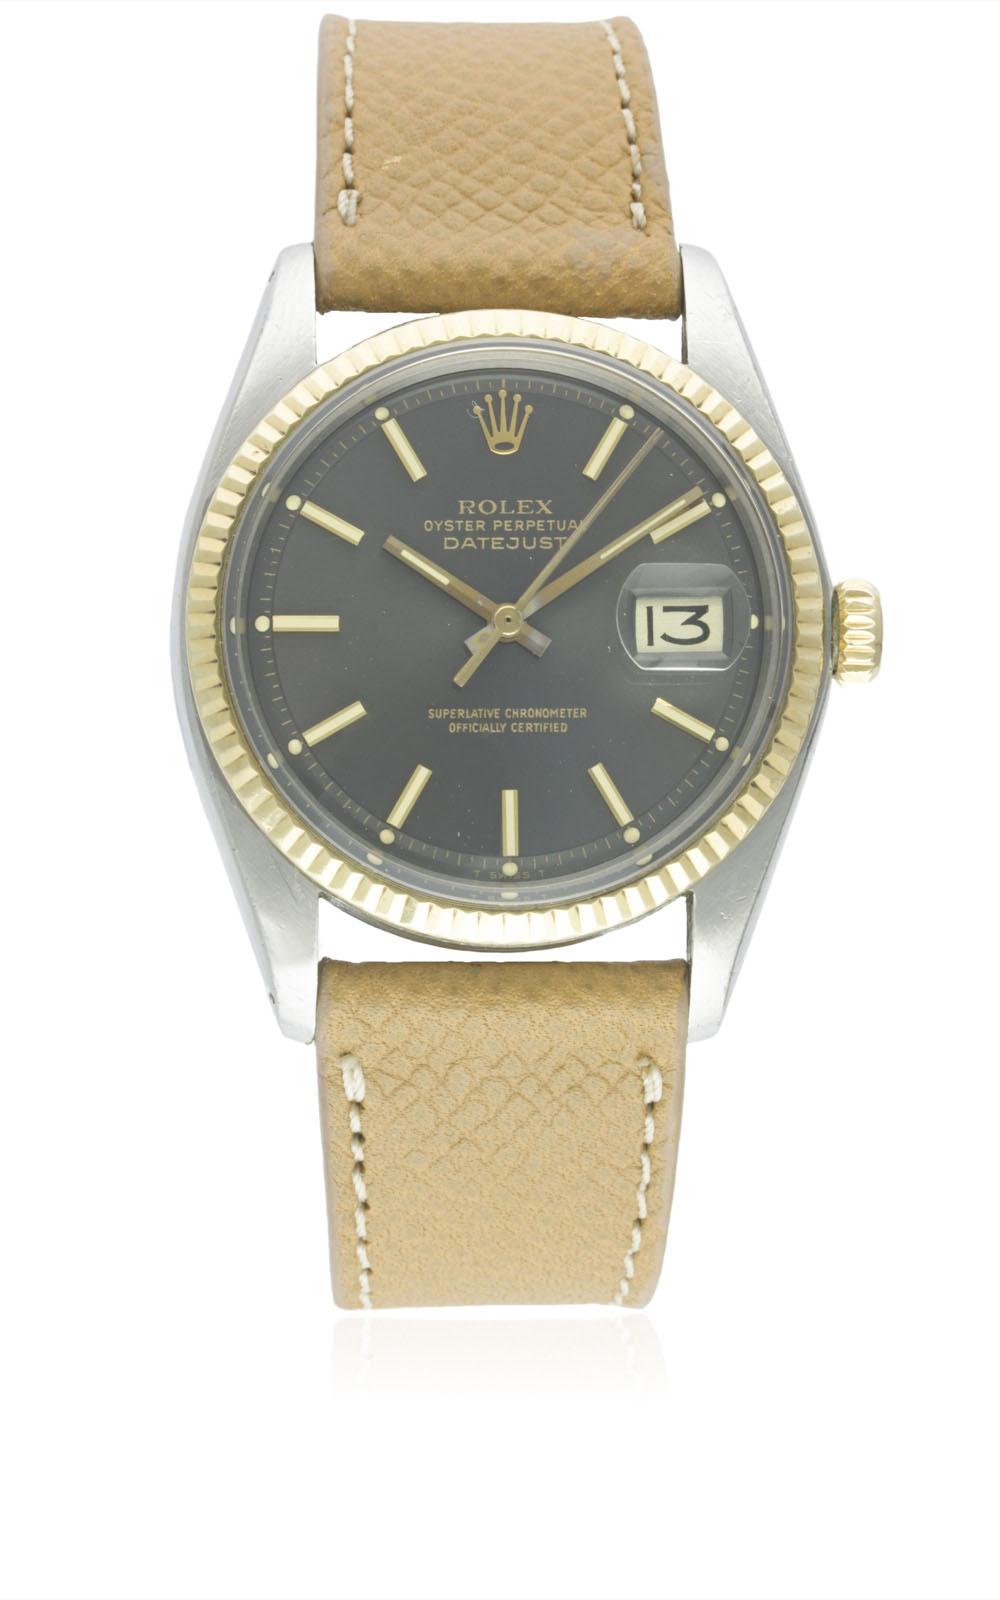 A GENTLEMAN'S STEEL & GOLD ROLEX OYSTER PERPETUAL DATEJUST WRIST WATCH CIRCA 1977, REF. 1601 WITH